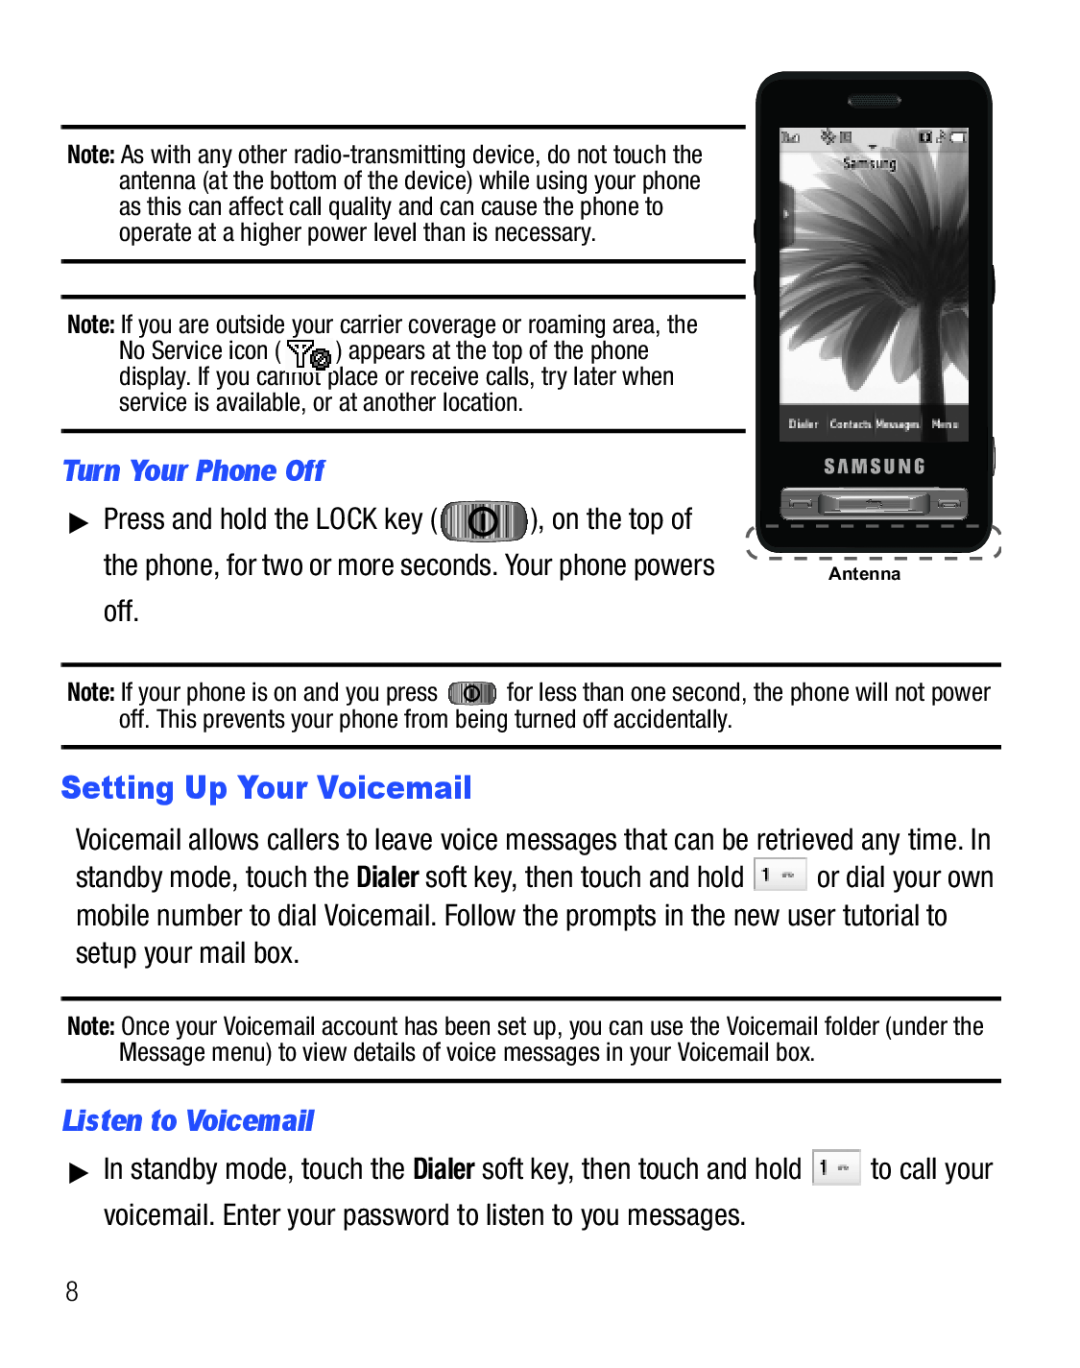 Samsung GH68-25119A user manual Setting Up Your Voicemail, Turn Your Phone Off, Listen to Voicemail 